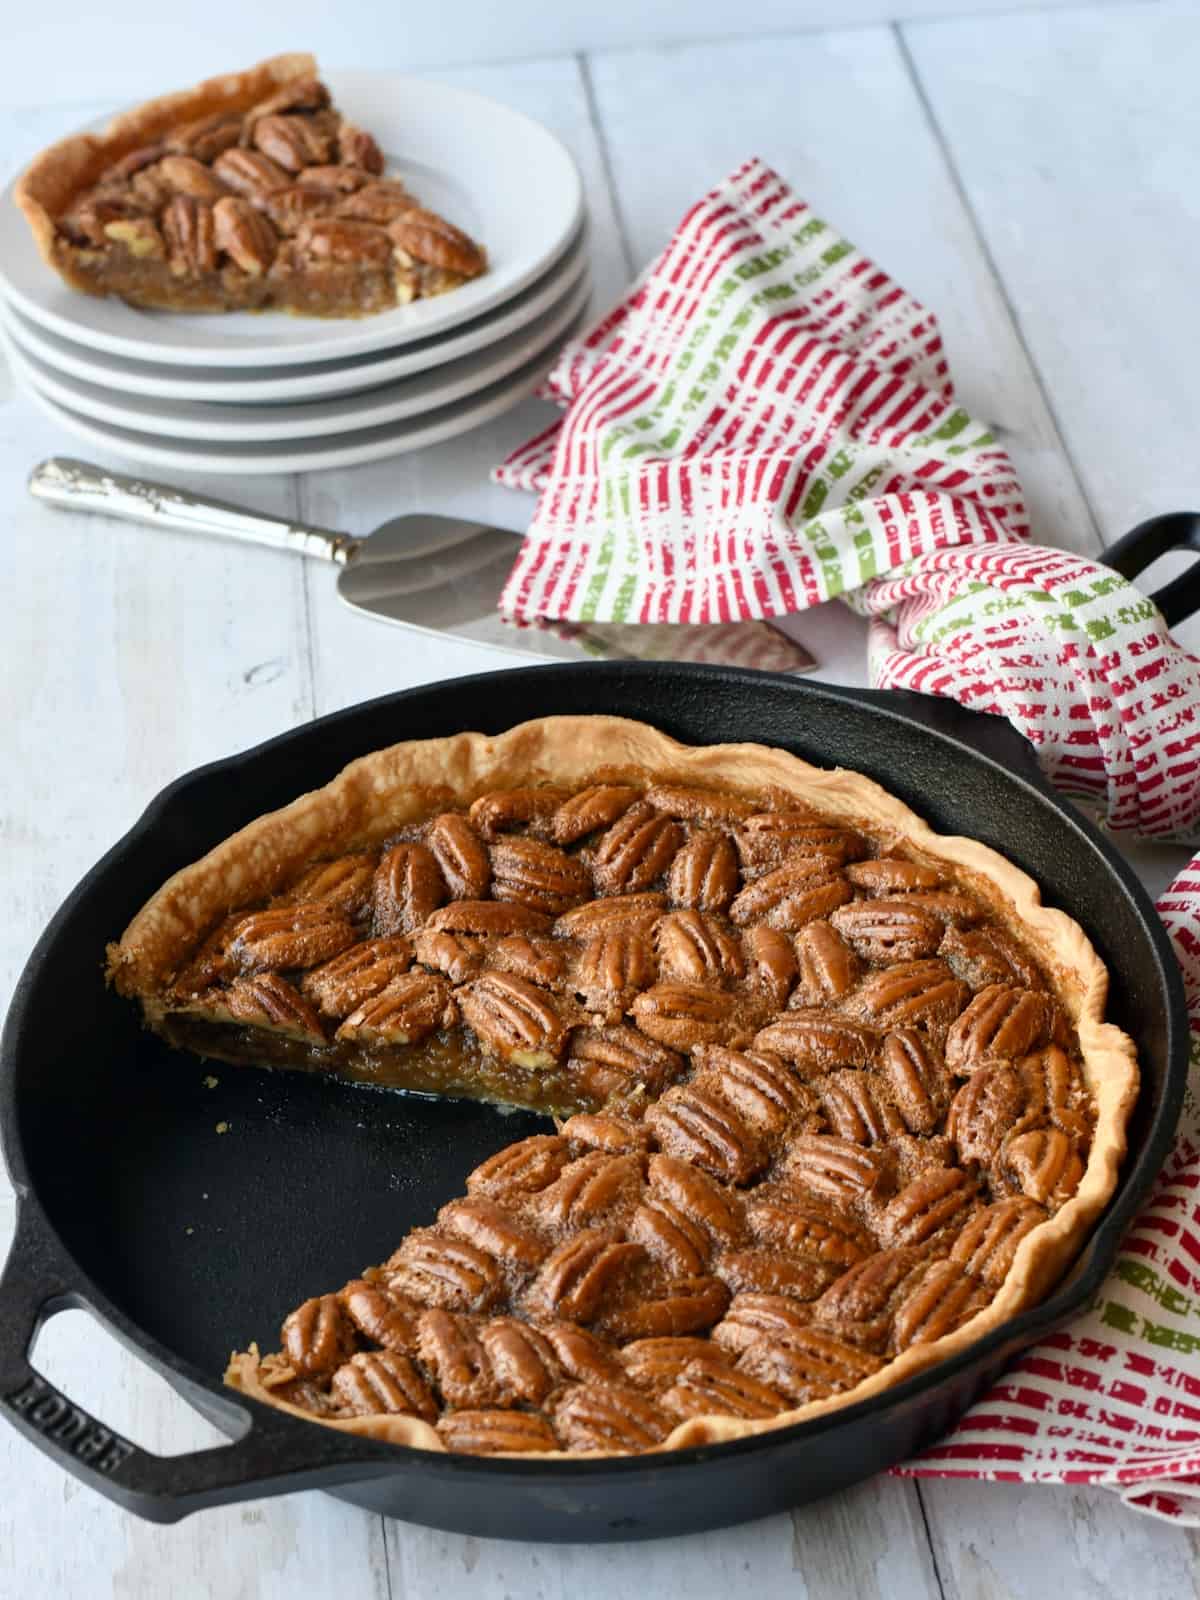 Pecan pie in cast iron skillet with slice out. Slice on top of white stack of plates.